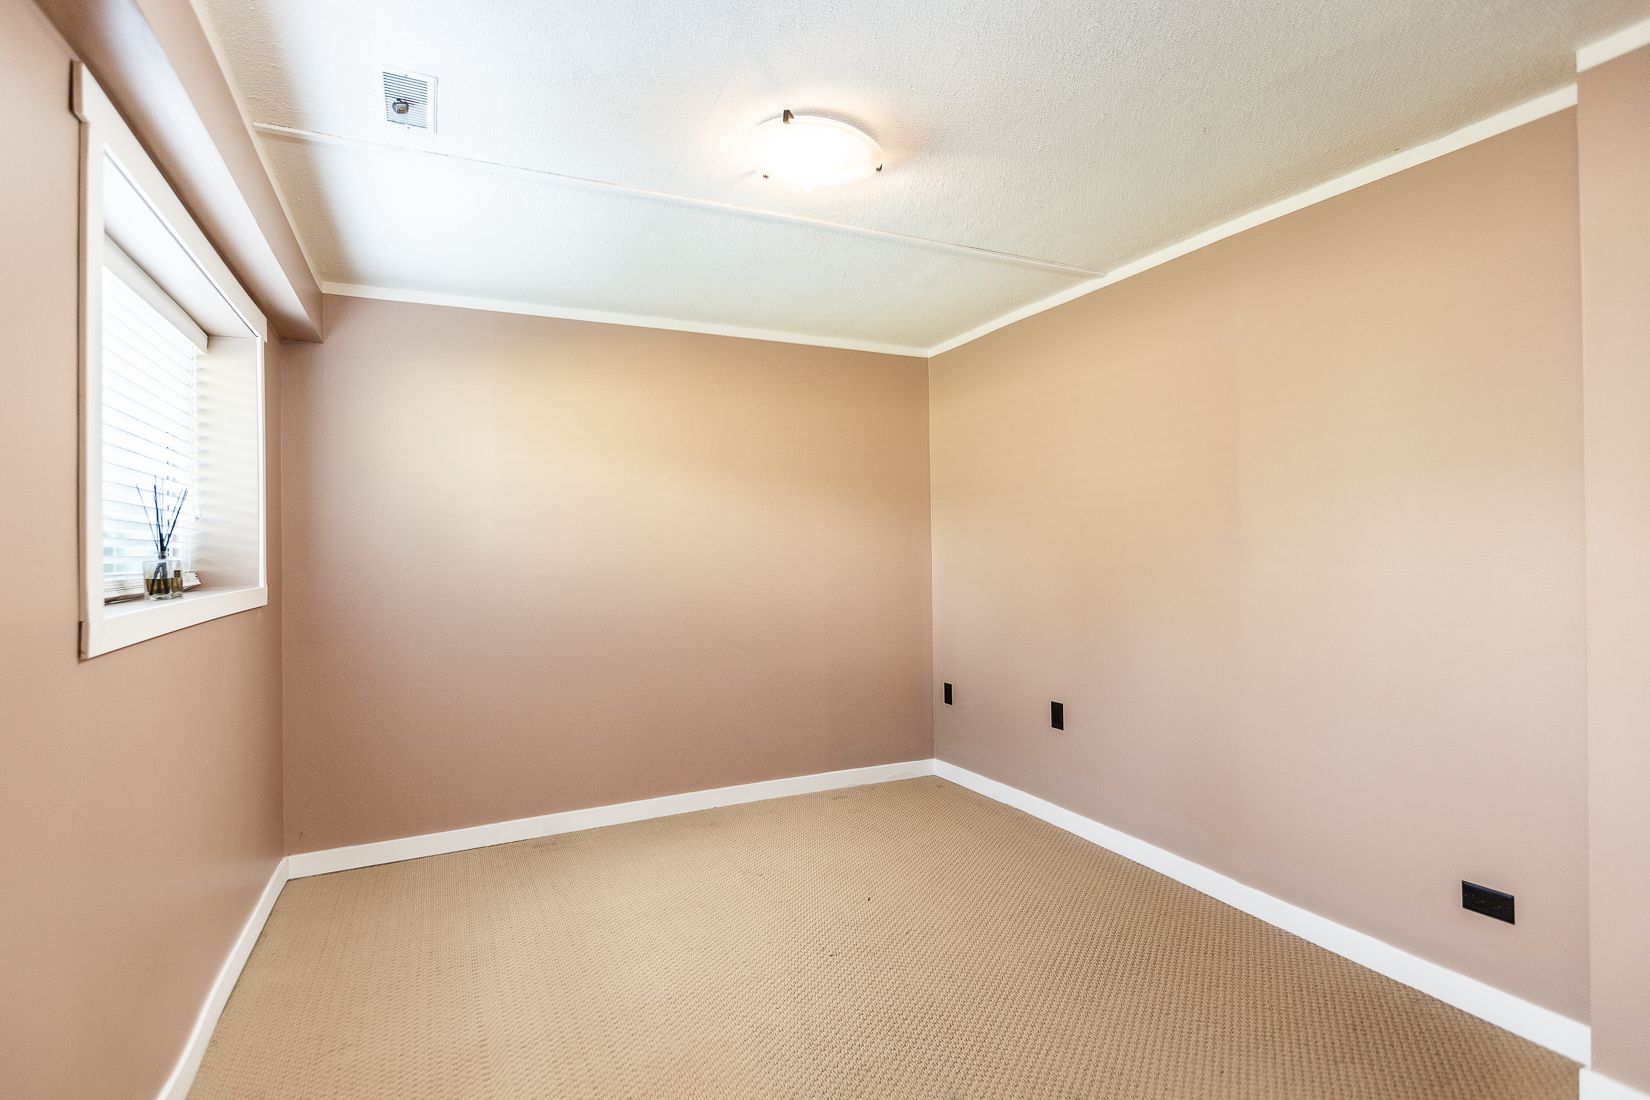 Photo 11: Photos: SPRINGDALE CT in BURNABY: Parkcrest House for sale (Burnaby North)  : MLS®# R2591718